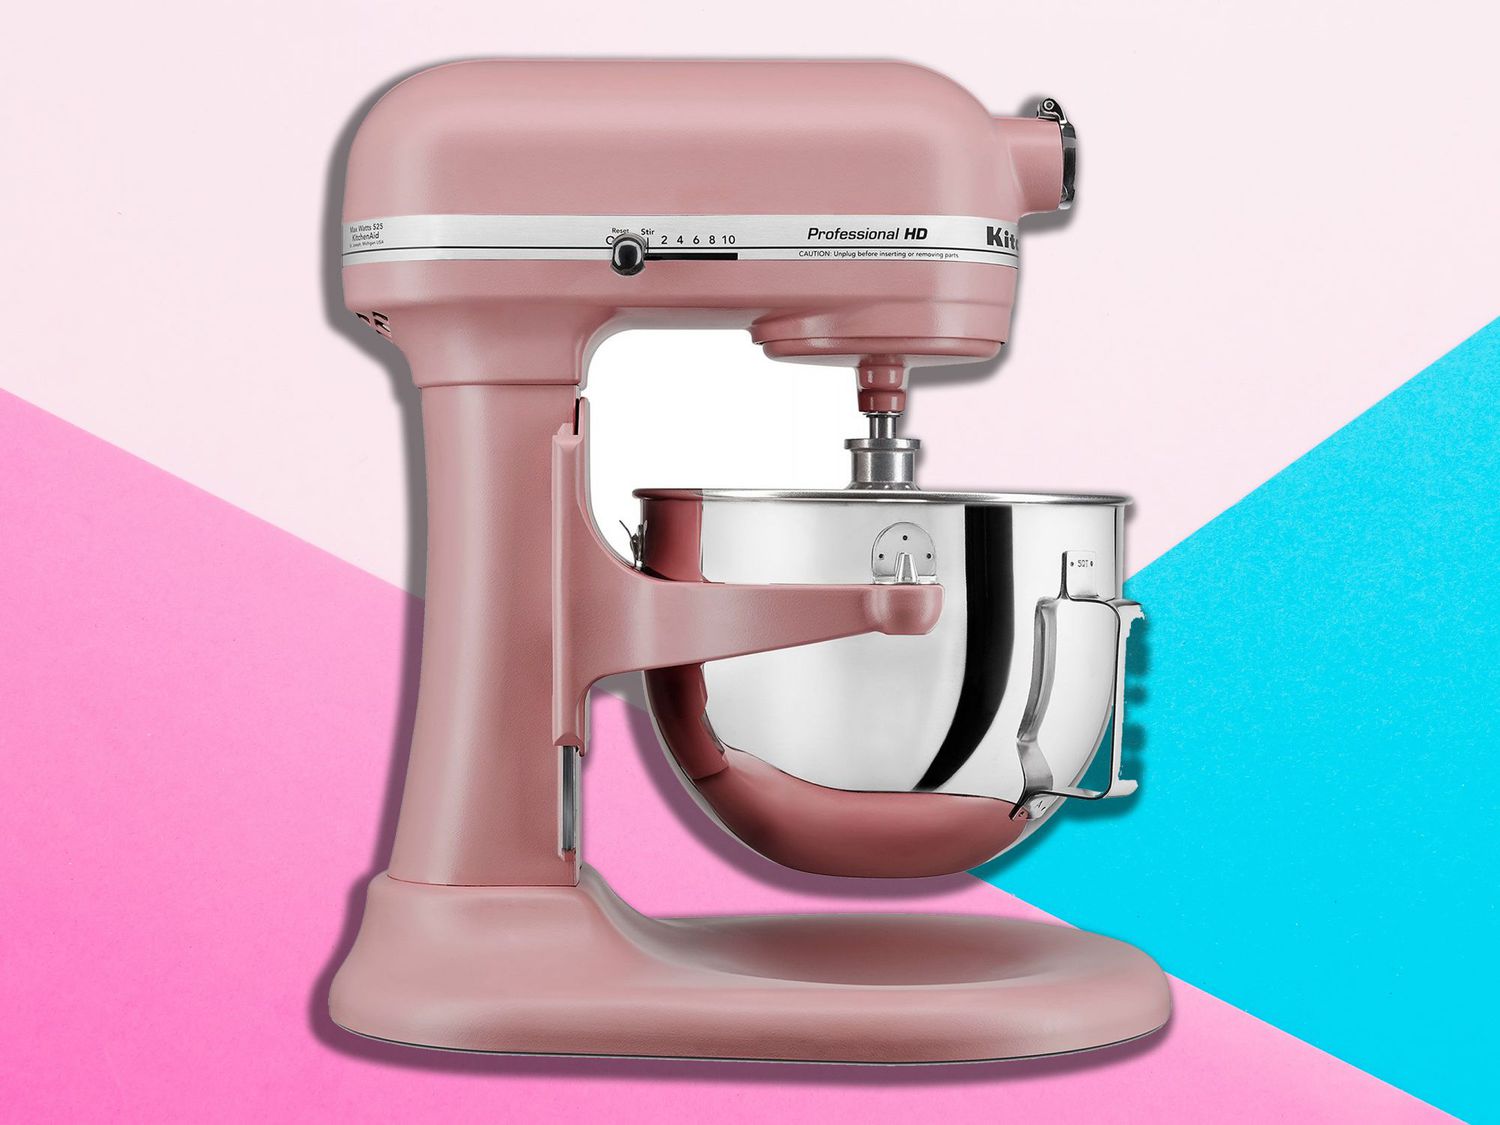 kitchenaid-stand-mixers-are-30-percent-off-at-sam-s-club-right-now